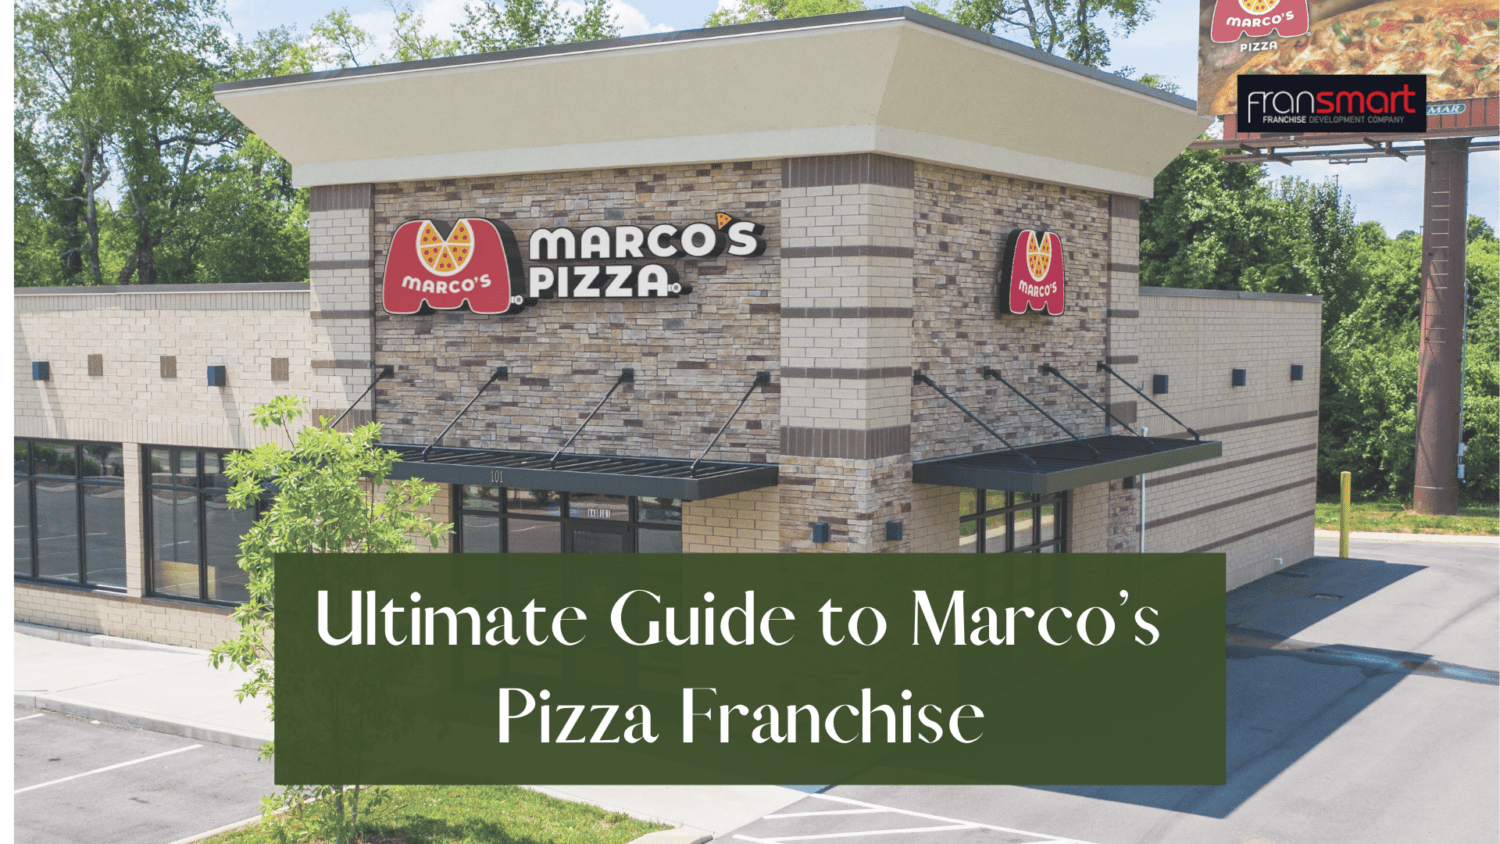 Ultimate Guide to Marco’s Pizza Franchise